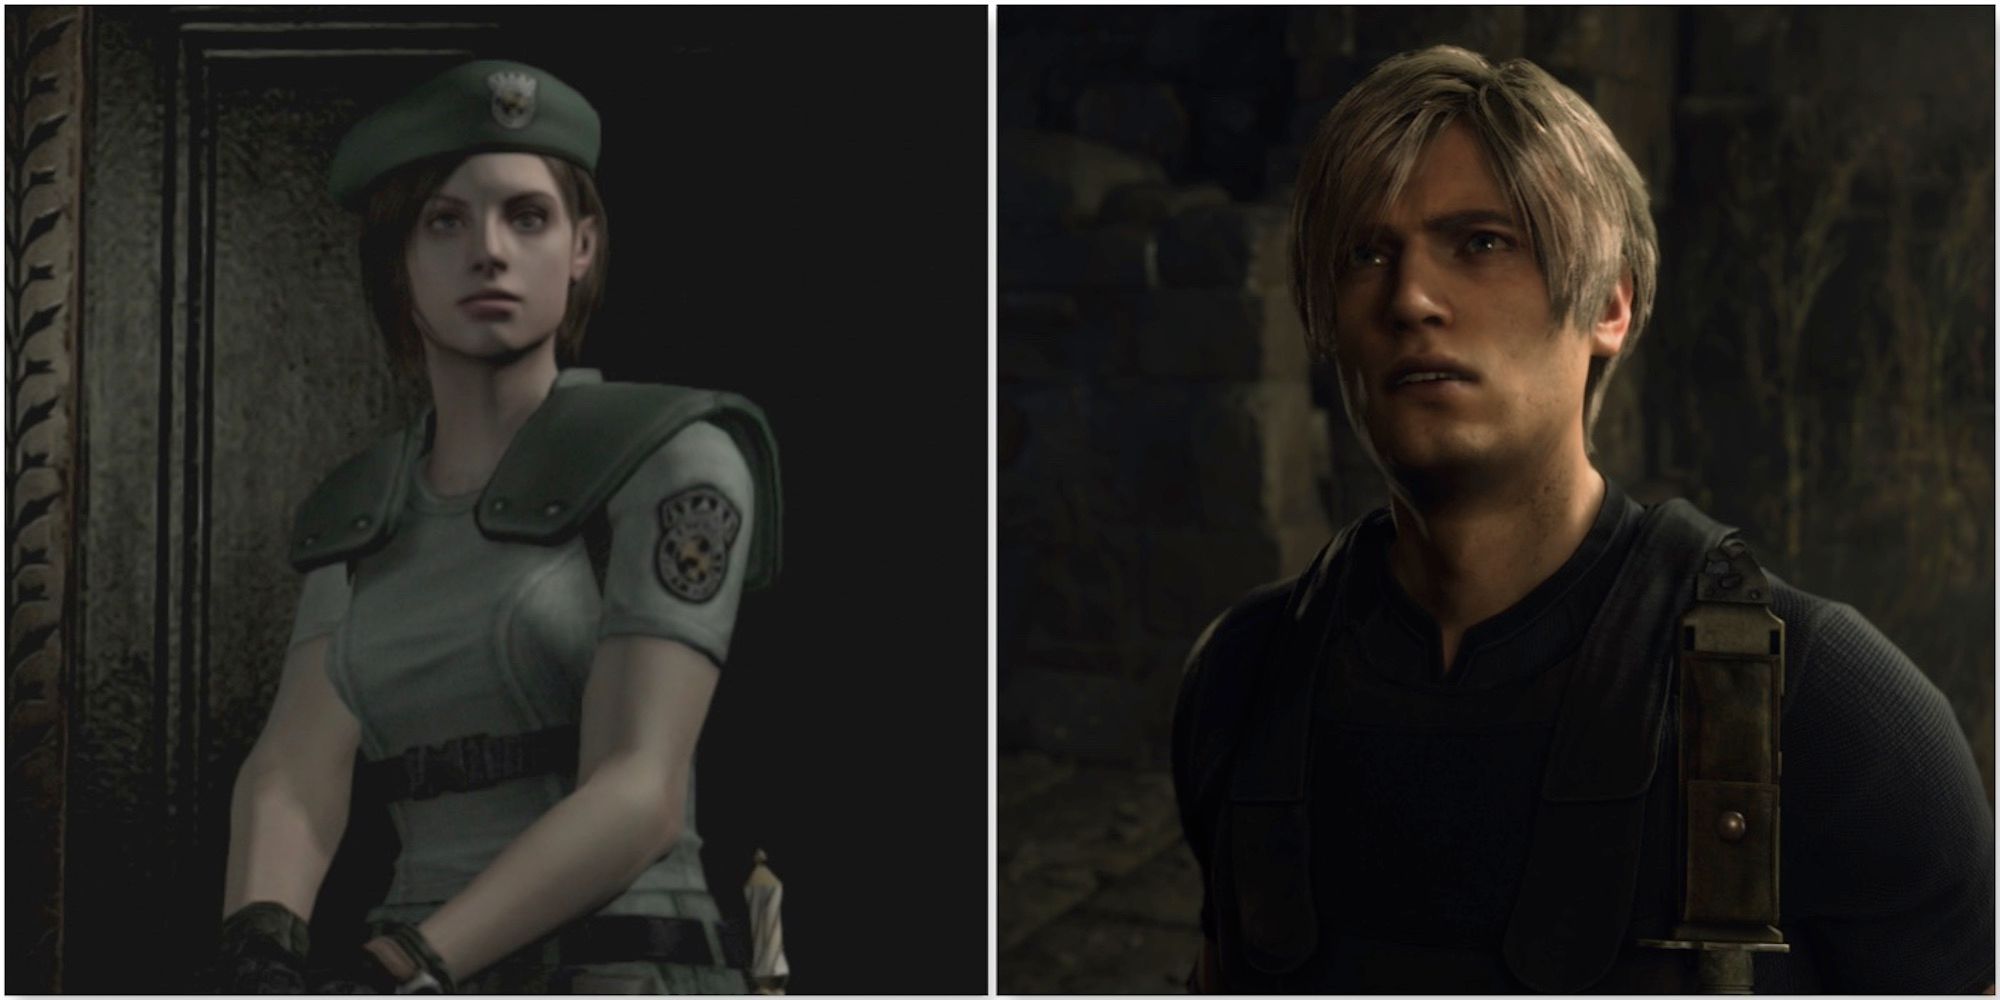 Jill in the Resident Evil remake and Leon in the Resident Evil 4 remake